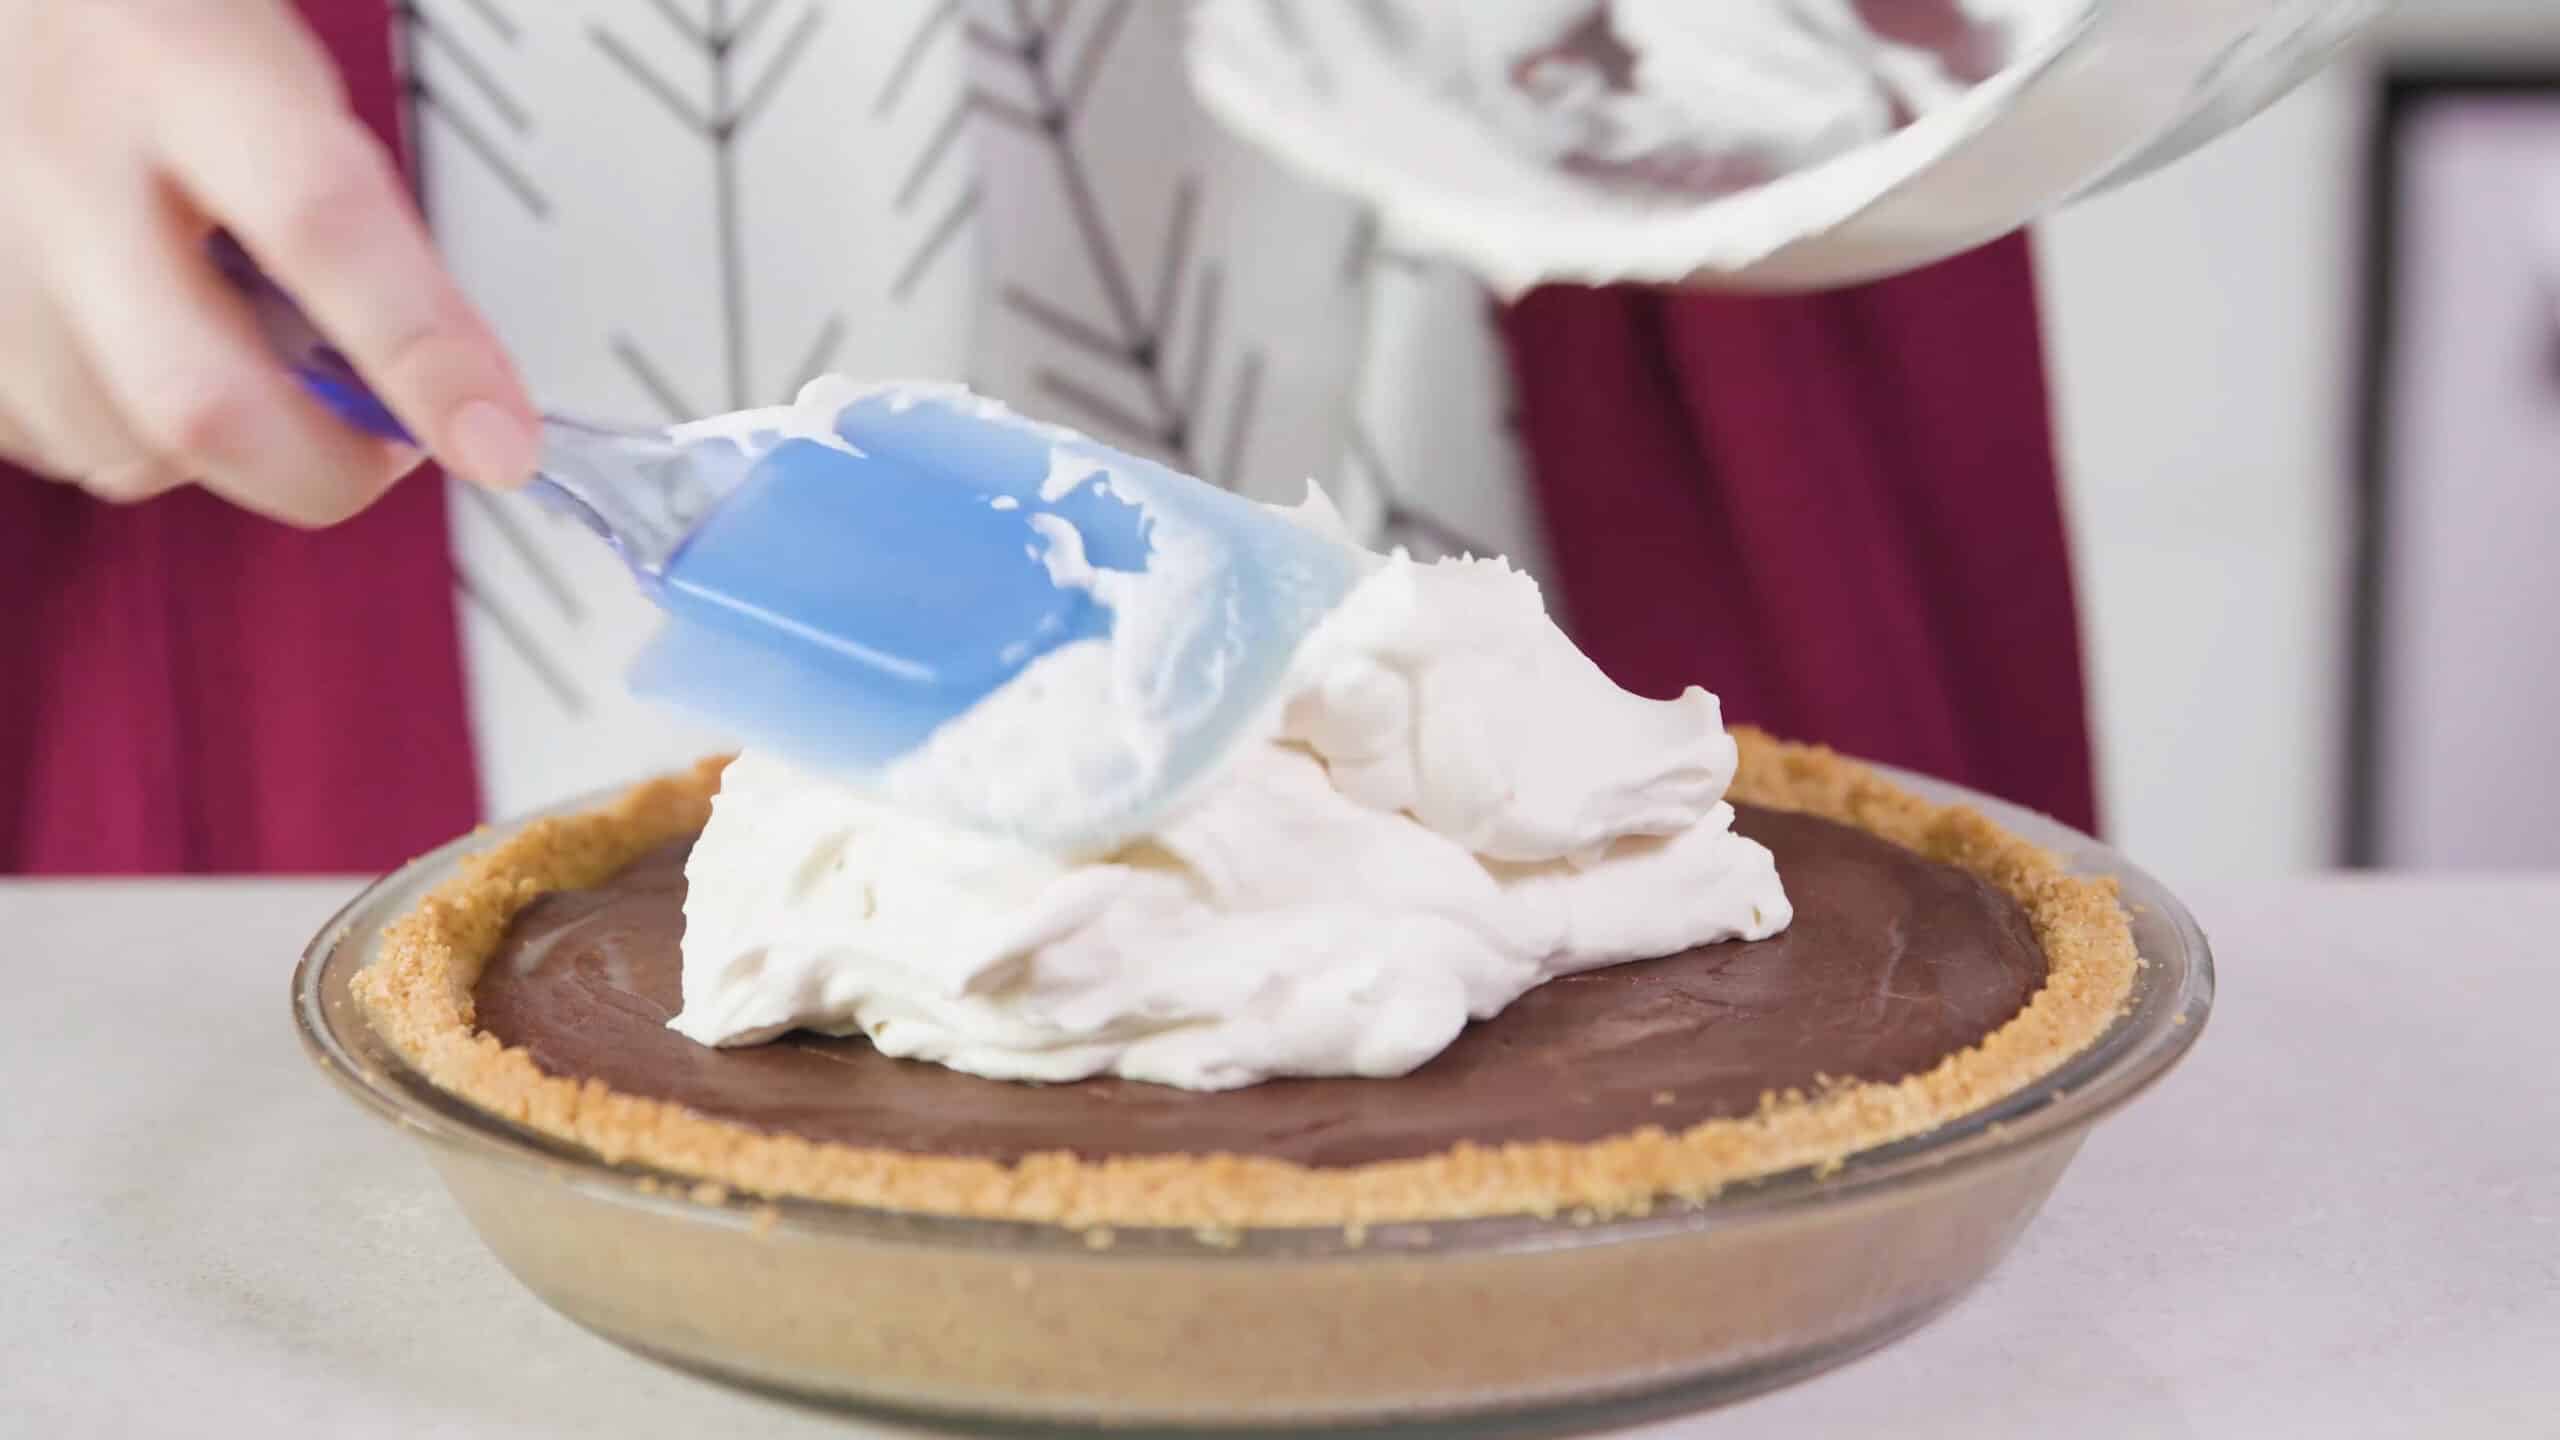 Side view of cooled chocolate cream pie with whipped cream piled on over the top by a plastic spatula from a clear glass mixing bowl.